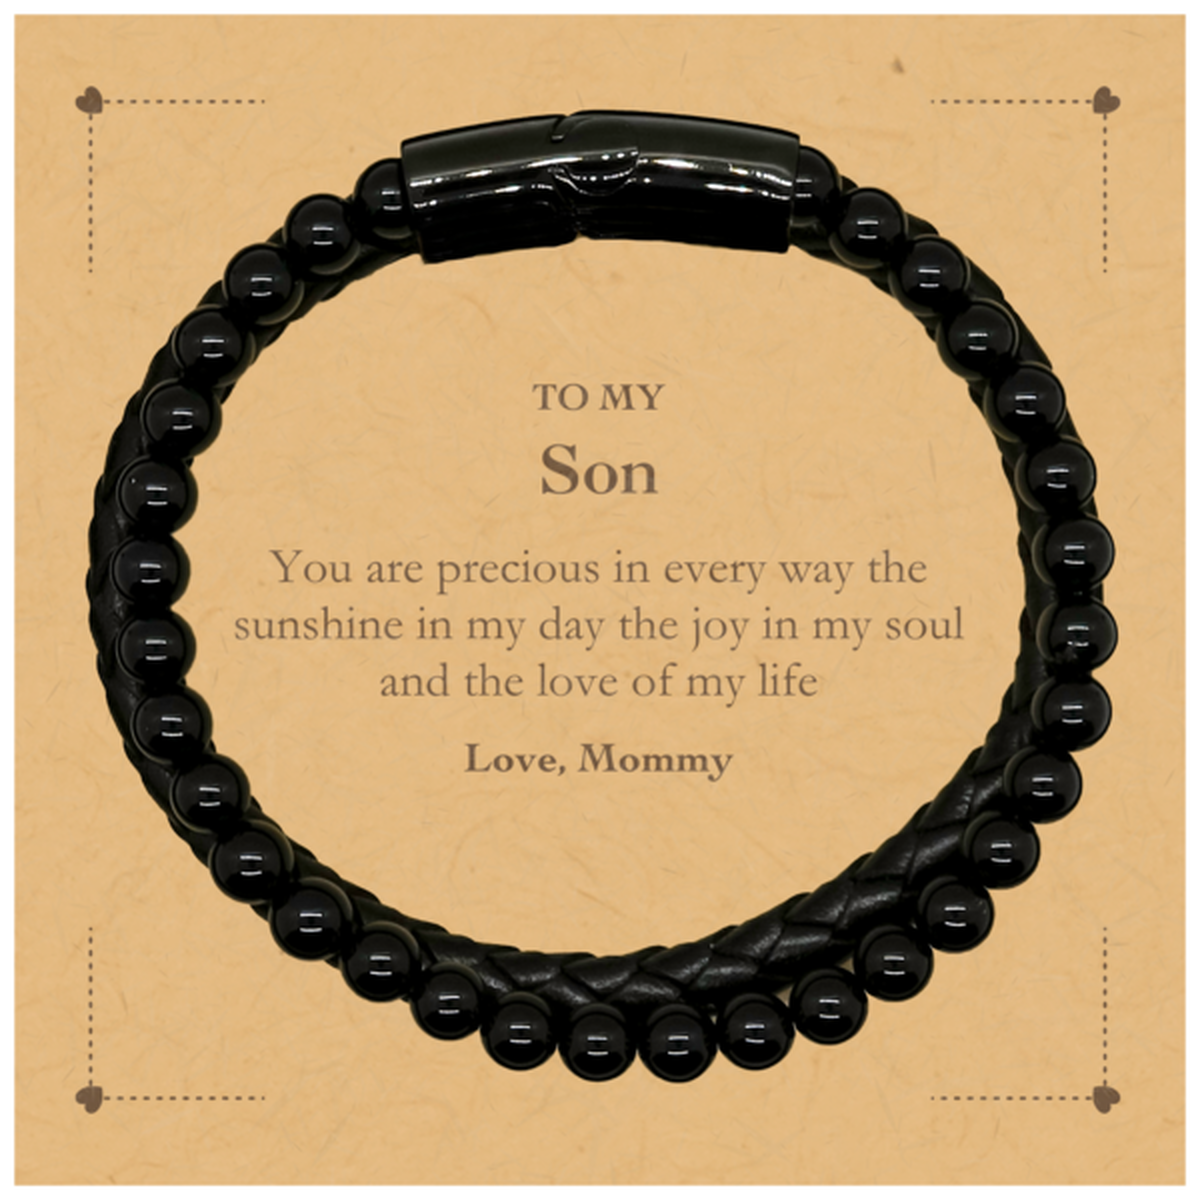 Graduation Gifts for Son Stone Leather Bracelets Present from Mommy, Christmas Son Birthday Gifts Son You are precious in every way the sunshine in my day. Love, Mommy